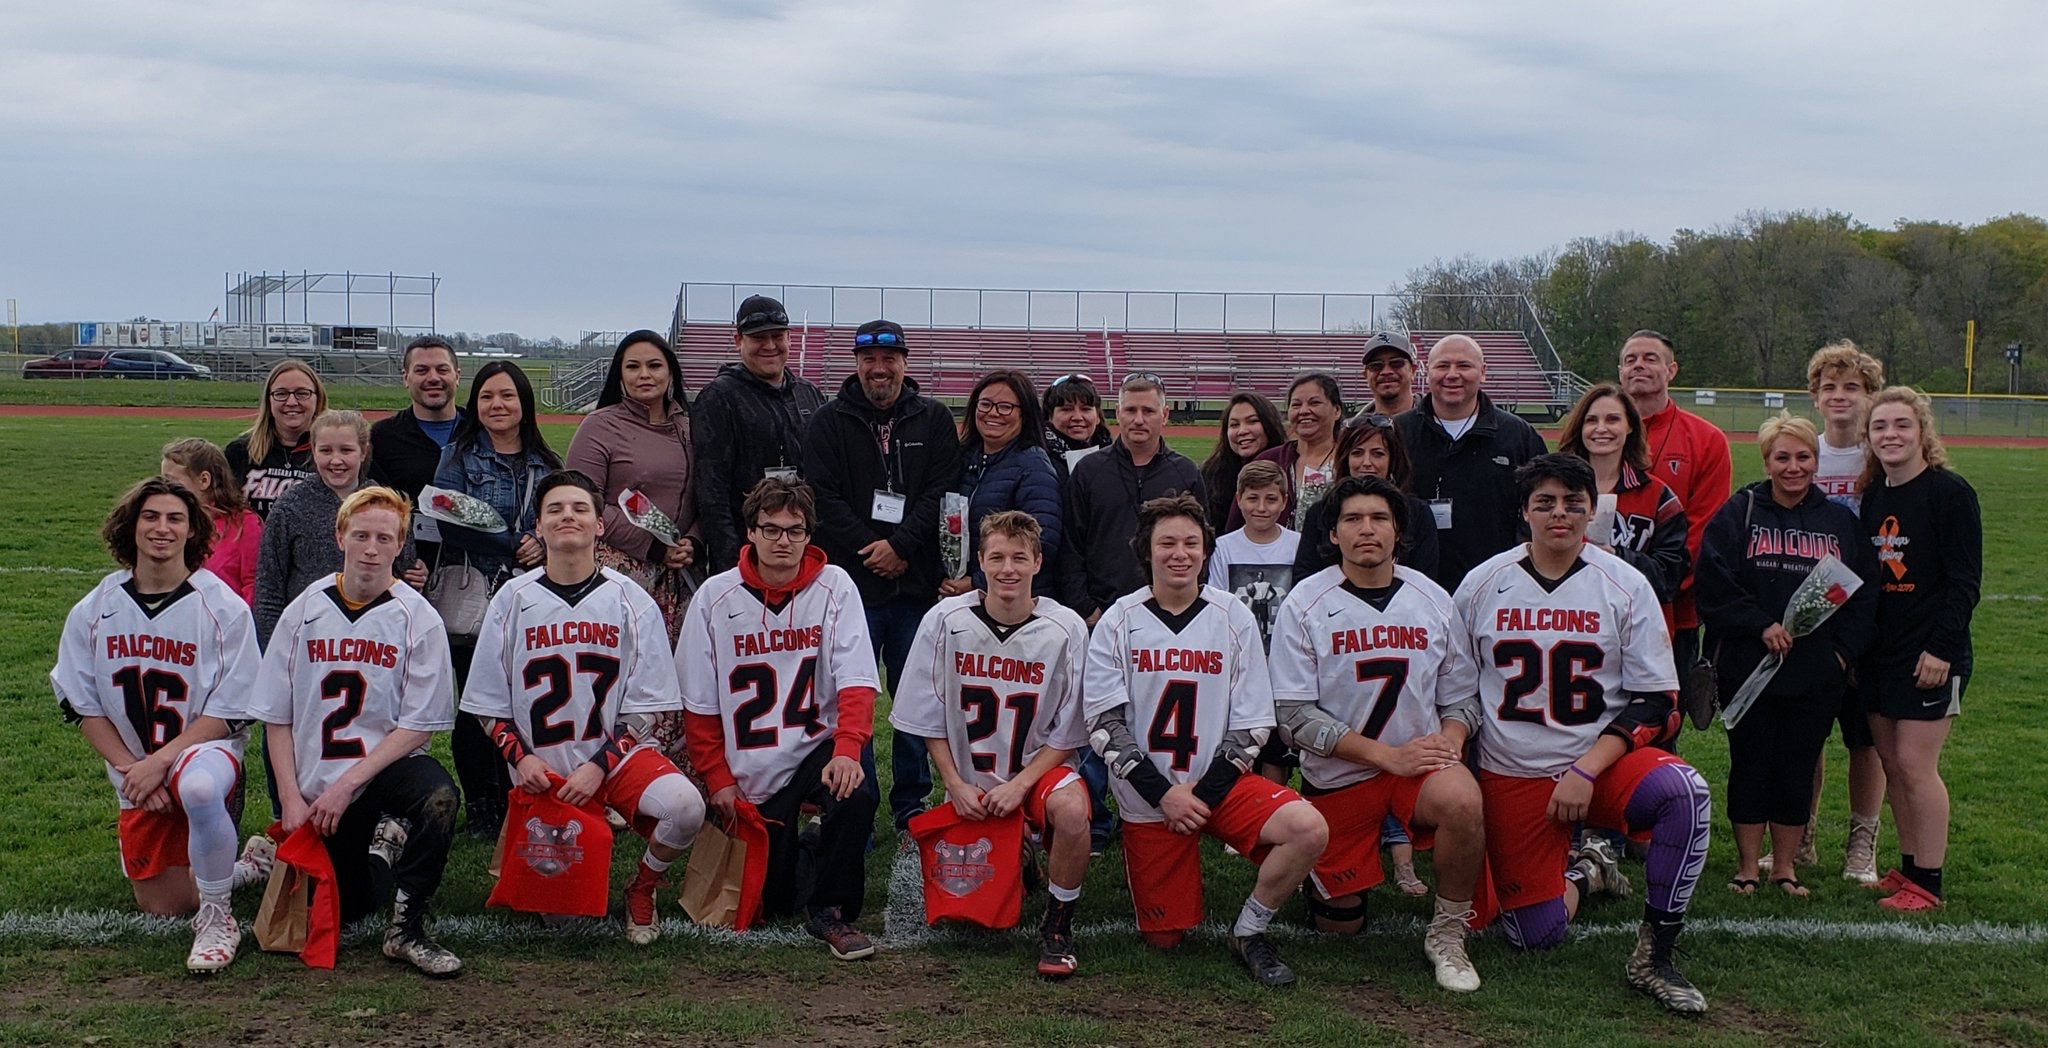 Seniors on the Falcons boys lacrosse team pose with their families. From left, kneeling, Reilly Krupa, Noah Bennett, Jaren Dixon, Wile Chapman, Nick Stott, Eli Dowdy, Devin Napoleon and Jordan Smith. (Photo courtesy of N-W boys lacrosse Twitter account)